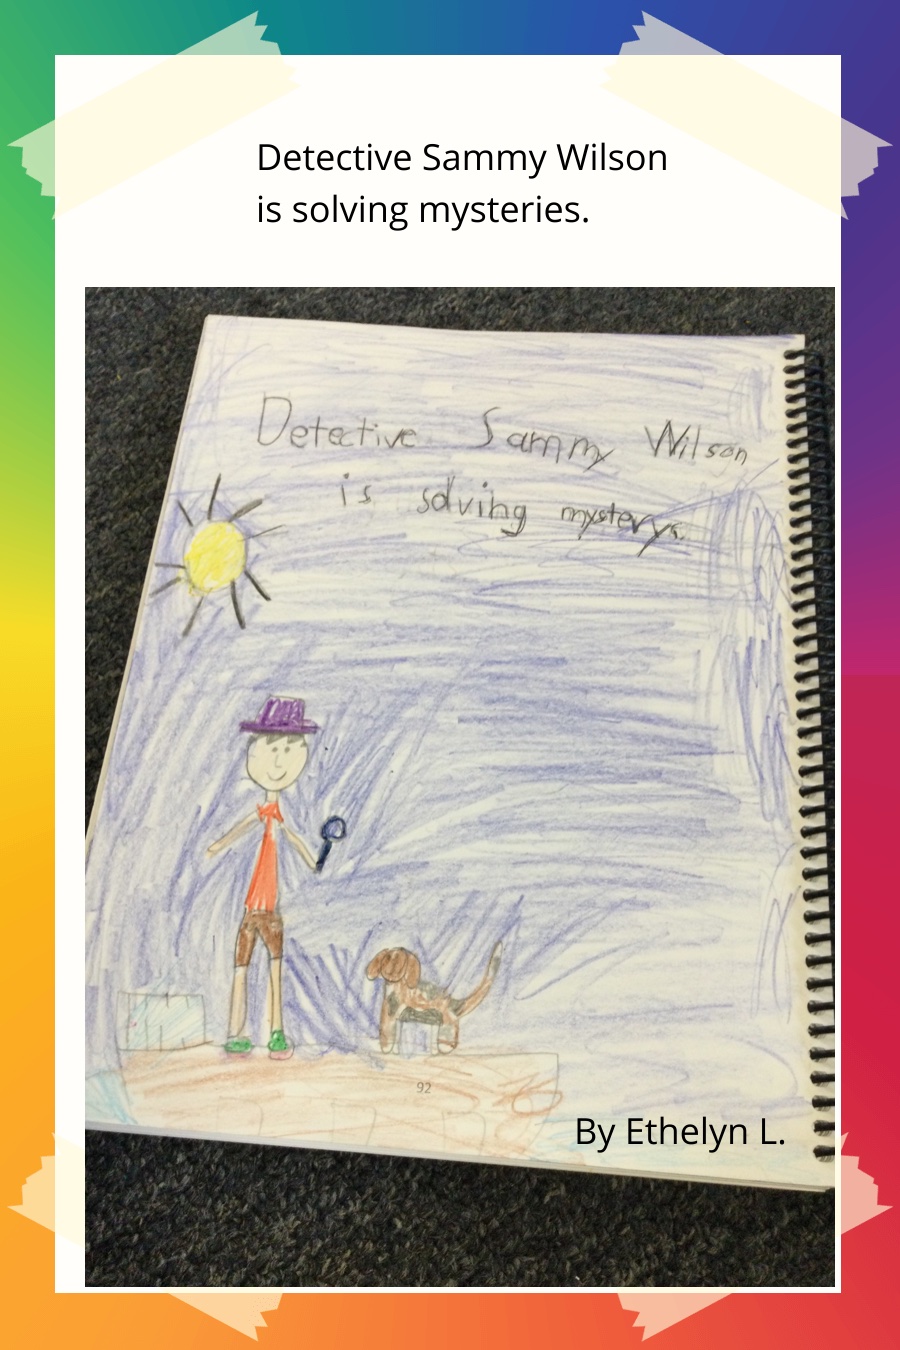 Detective Sammy Wilson is Solving Mysteries by Ethelyn L